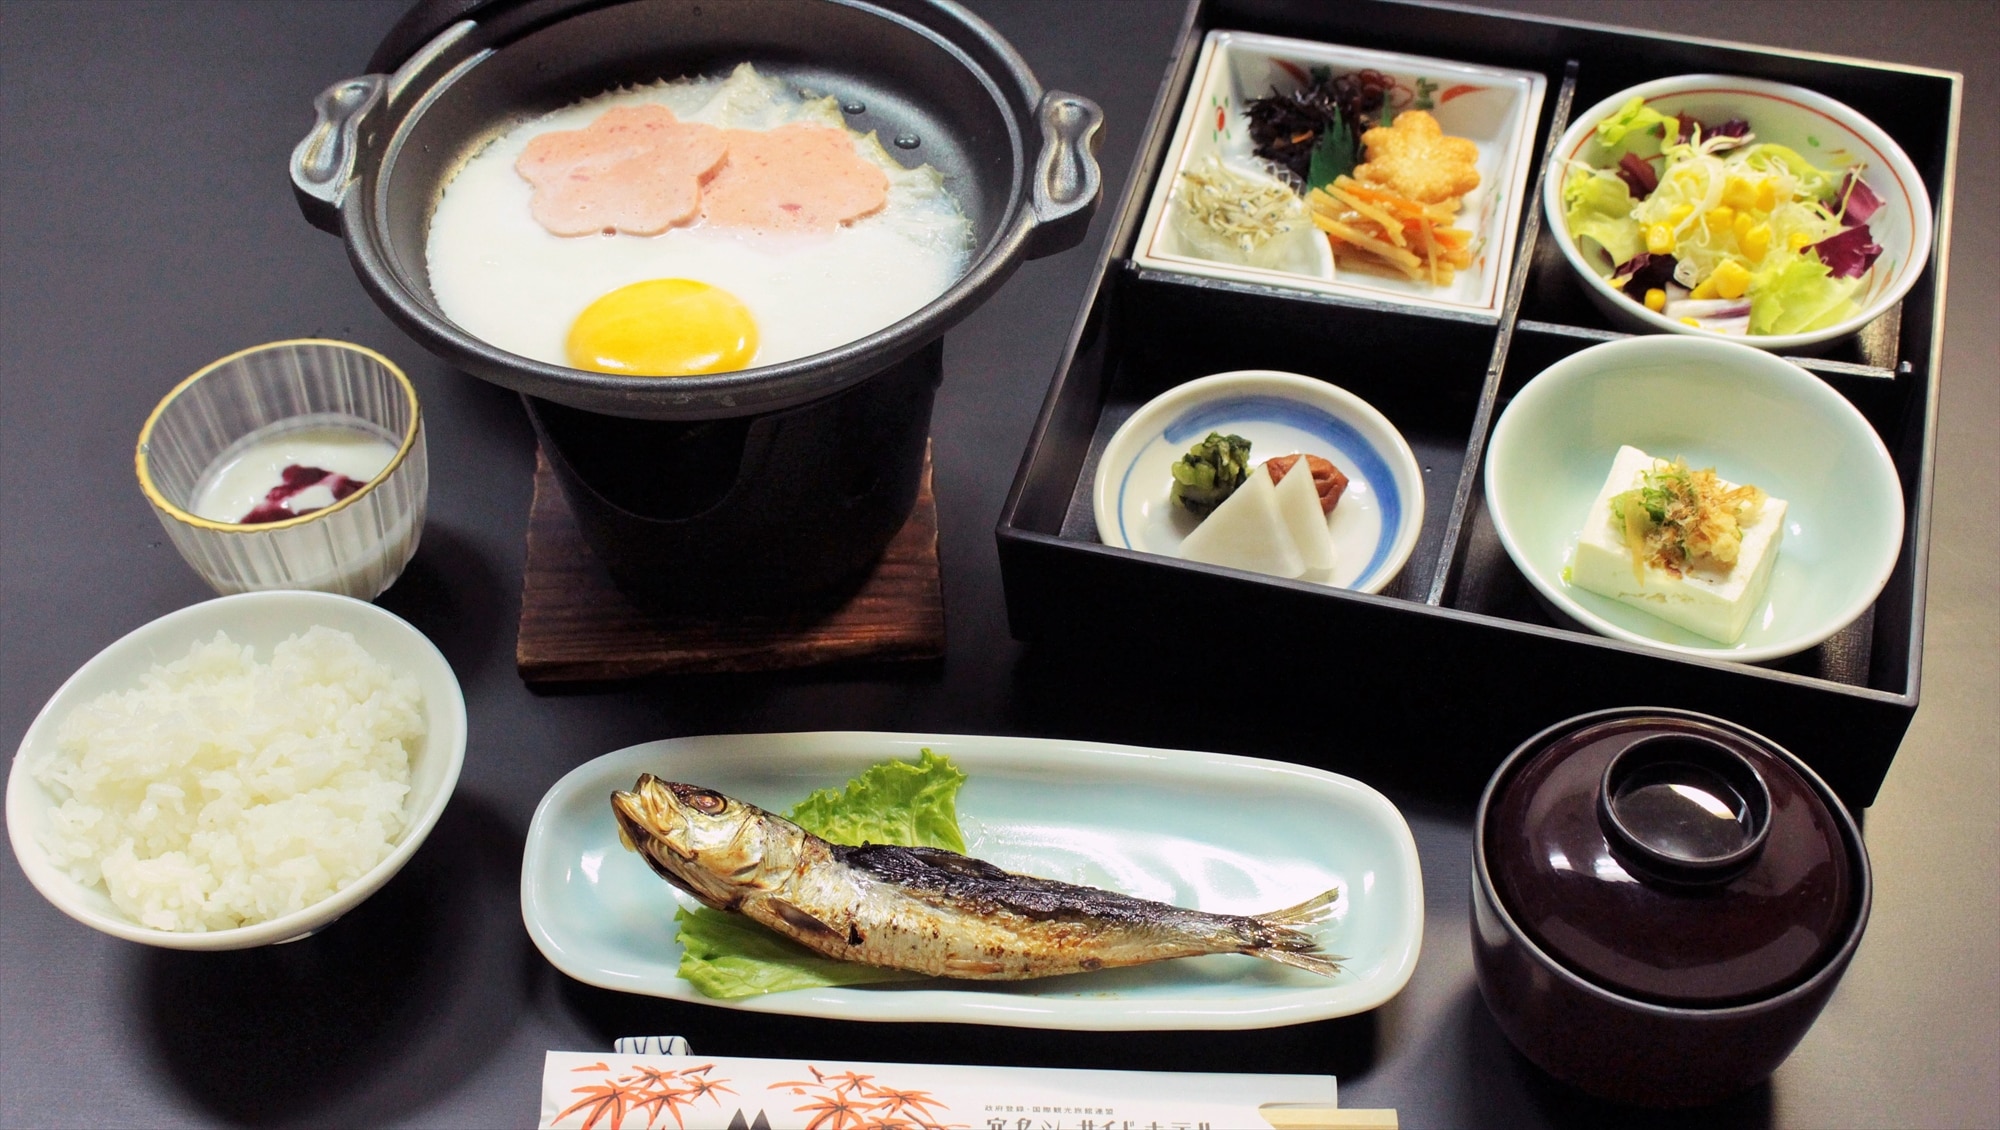 Breakfast is THE Japanese set meal! Grilled fish, egg dishes, tofu and miso soup! A healthy breakfast!